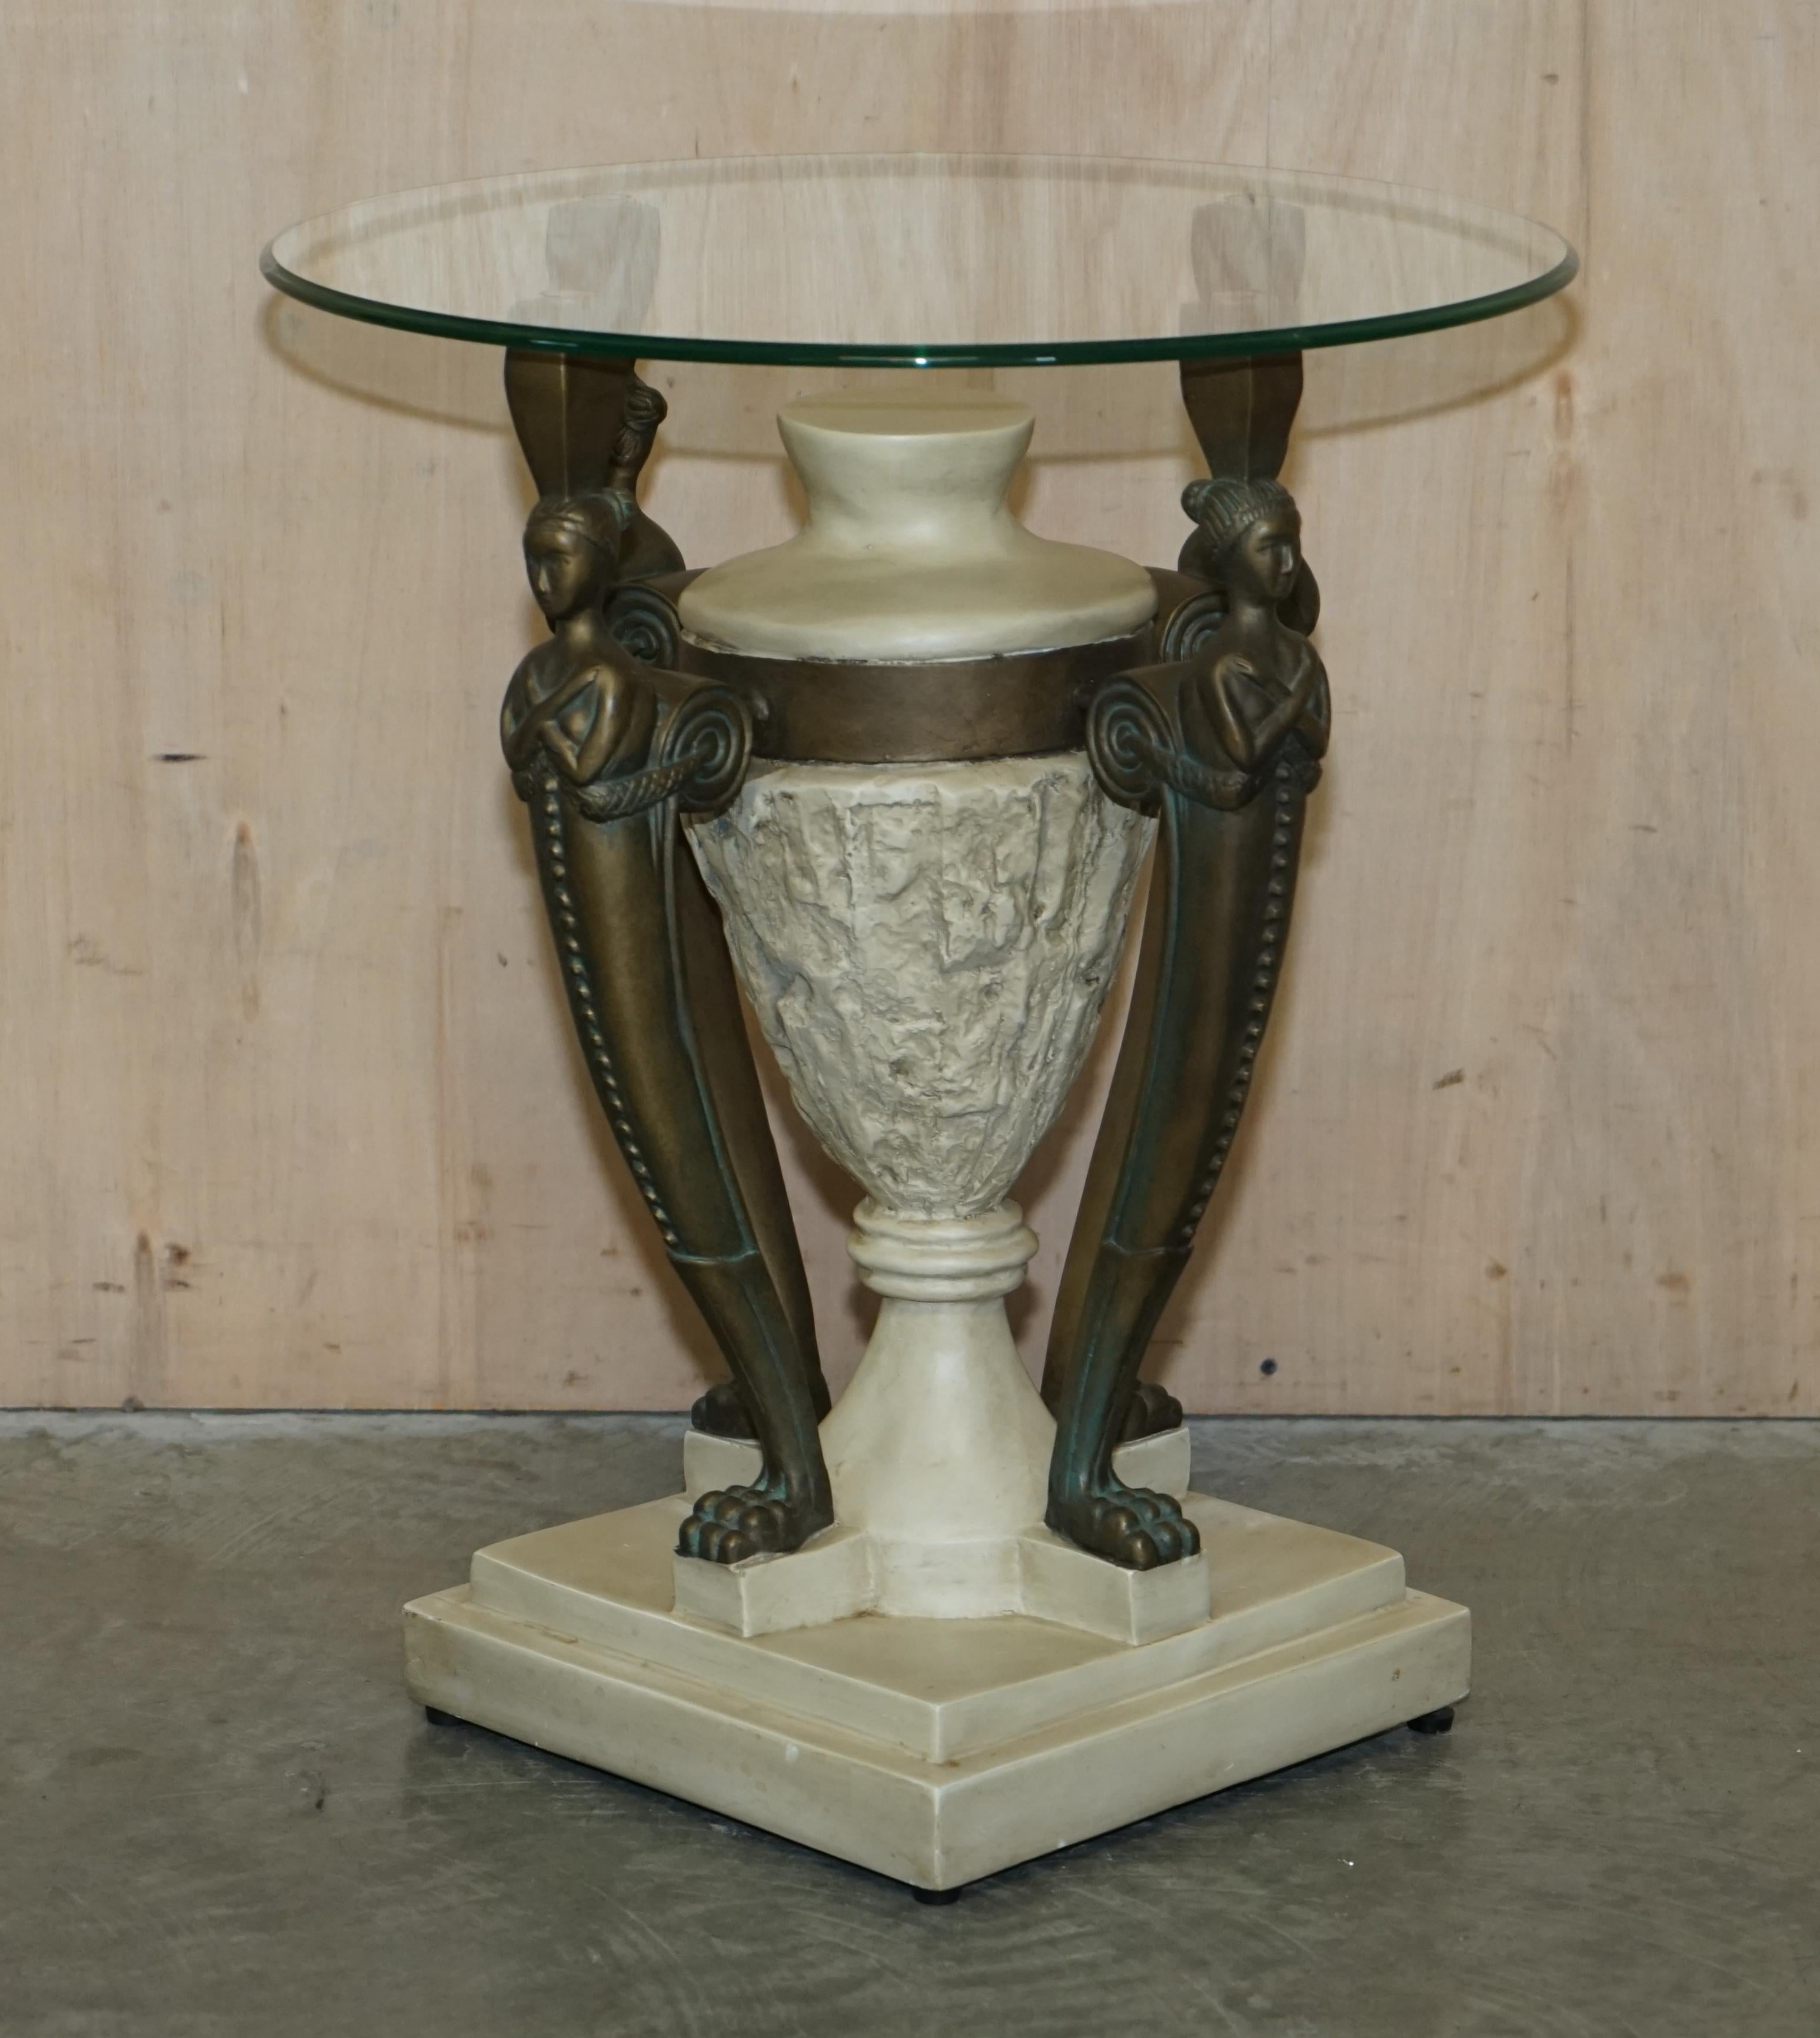 Royal House Antiques

Royal House Antiques is delighted to offer for sale this very decorative pair of Egyptian Revival side end lamp wine tables with glass tops

Please note the delivery fee listed is just a guide, it covers within the M25 only